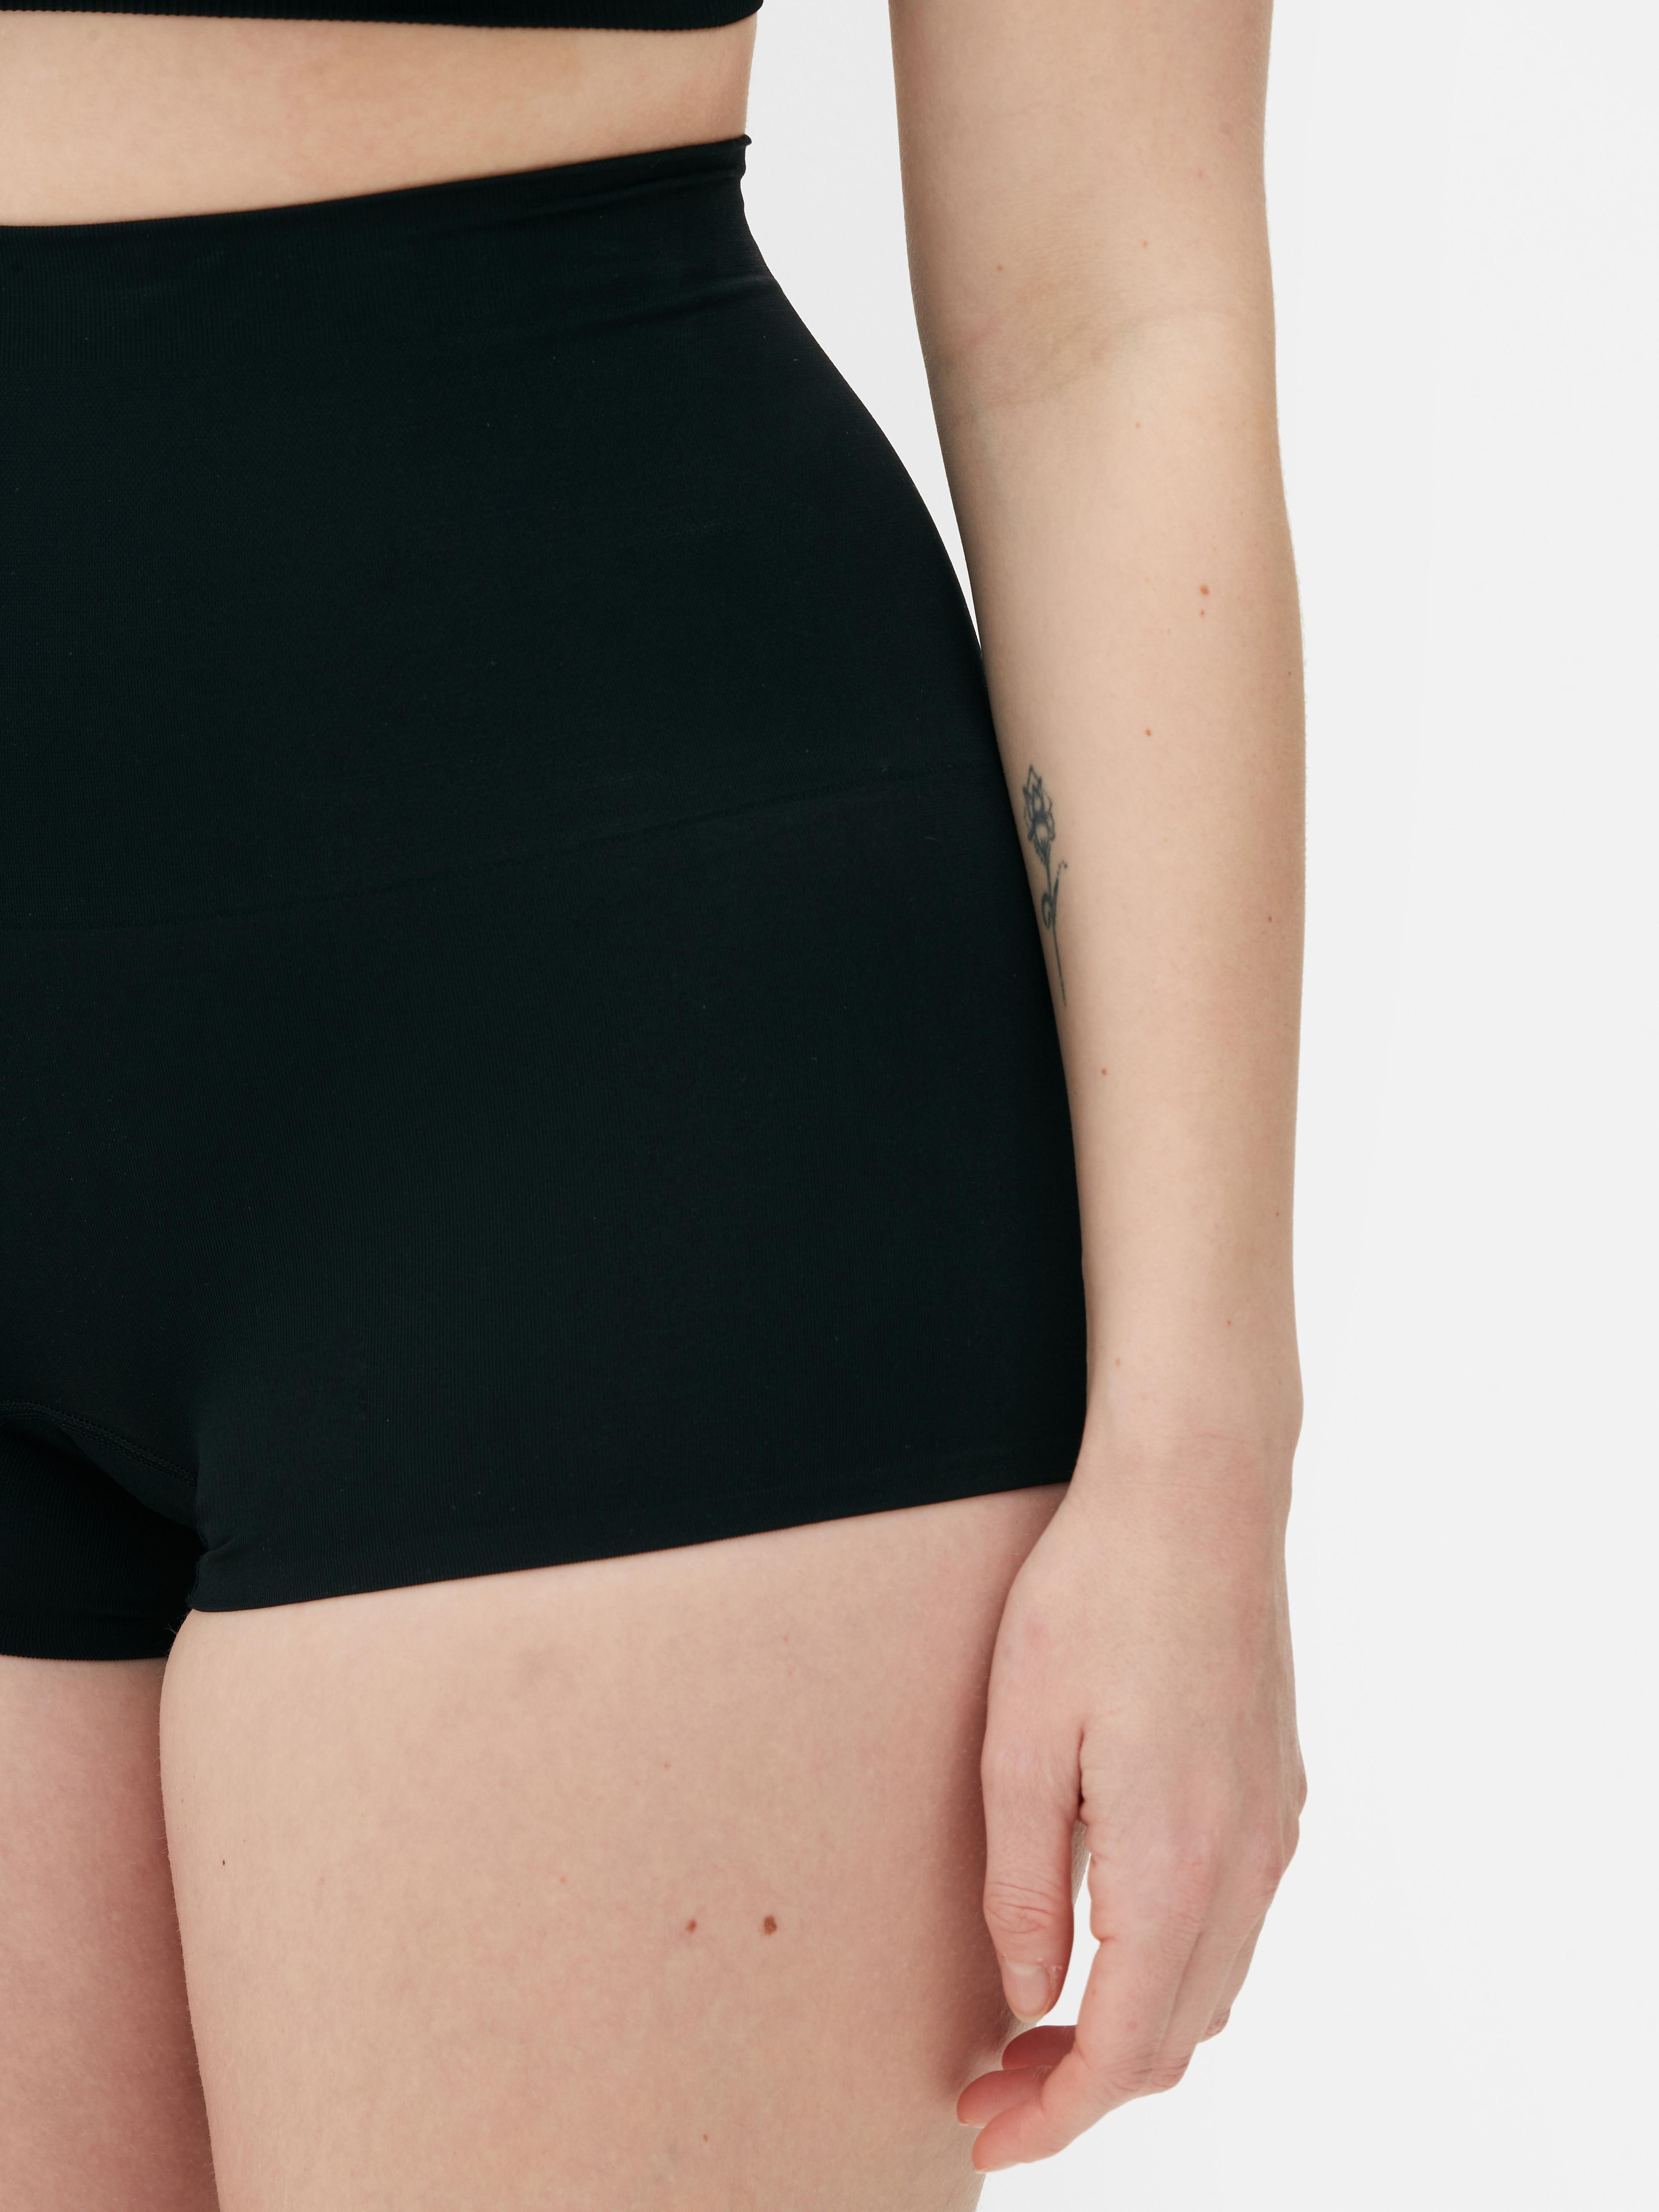 I tried a pair of £12 Primark shapewear shorts, the support is